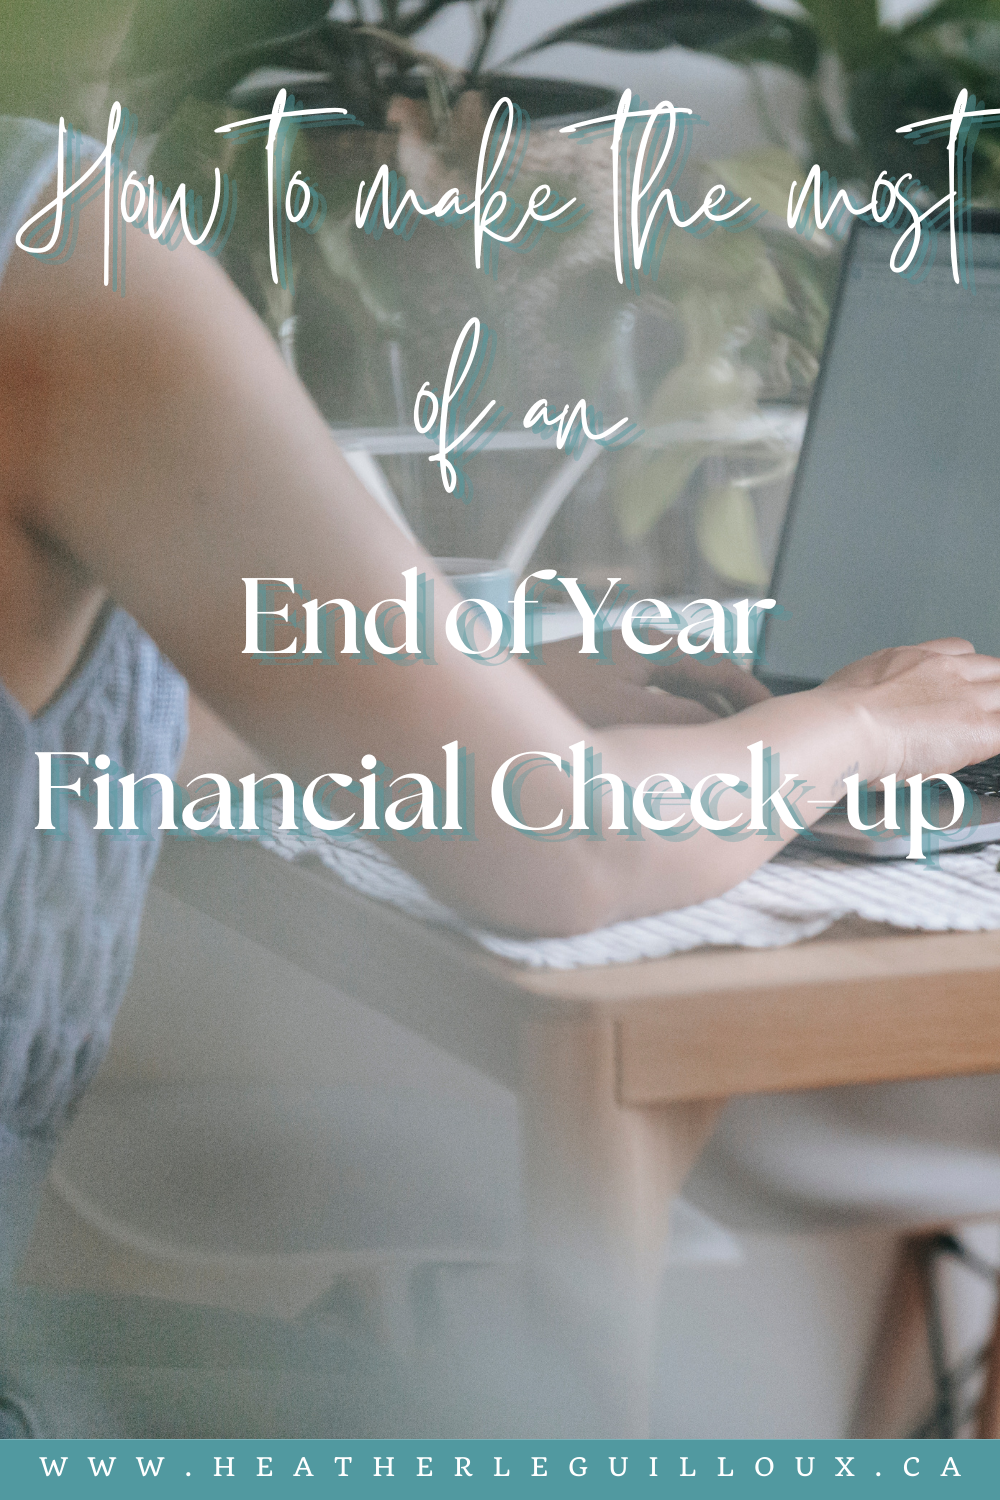 As we are soon arriving at the end of another year, it can be a time of reflection and pause to consider the financial learning we can gather from our experiences and efforts over the previous 12 months. #finances #financialcheckup #endofyear #reflections